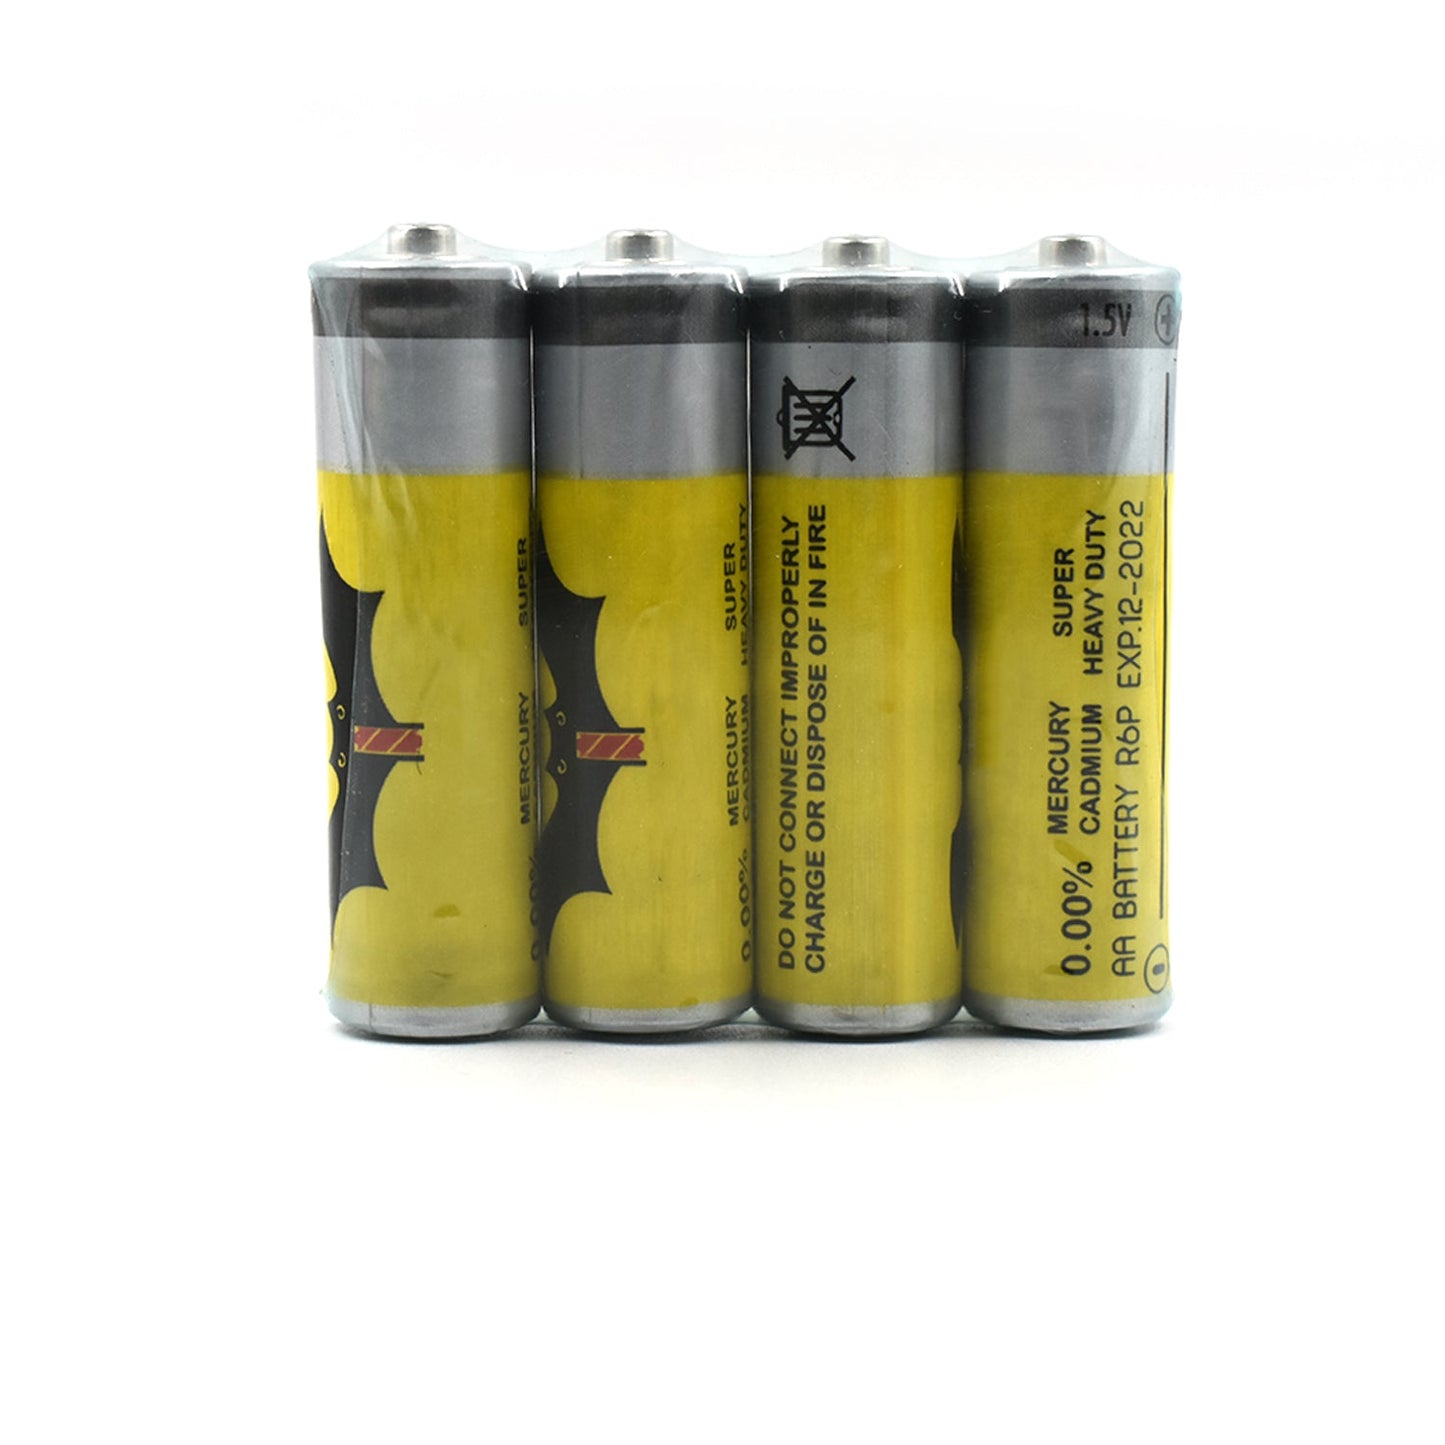 6121 4Pc AA Battery and power cells used in technical devices such as T.V remote, torch etc for their functioning. 